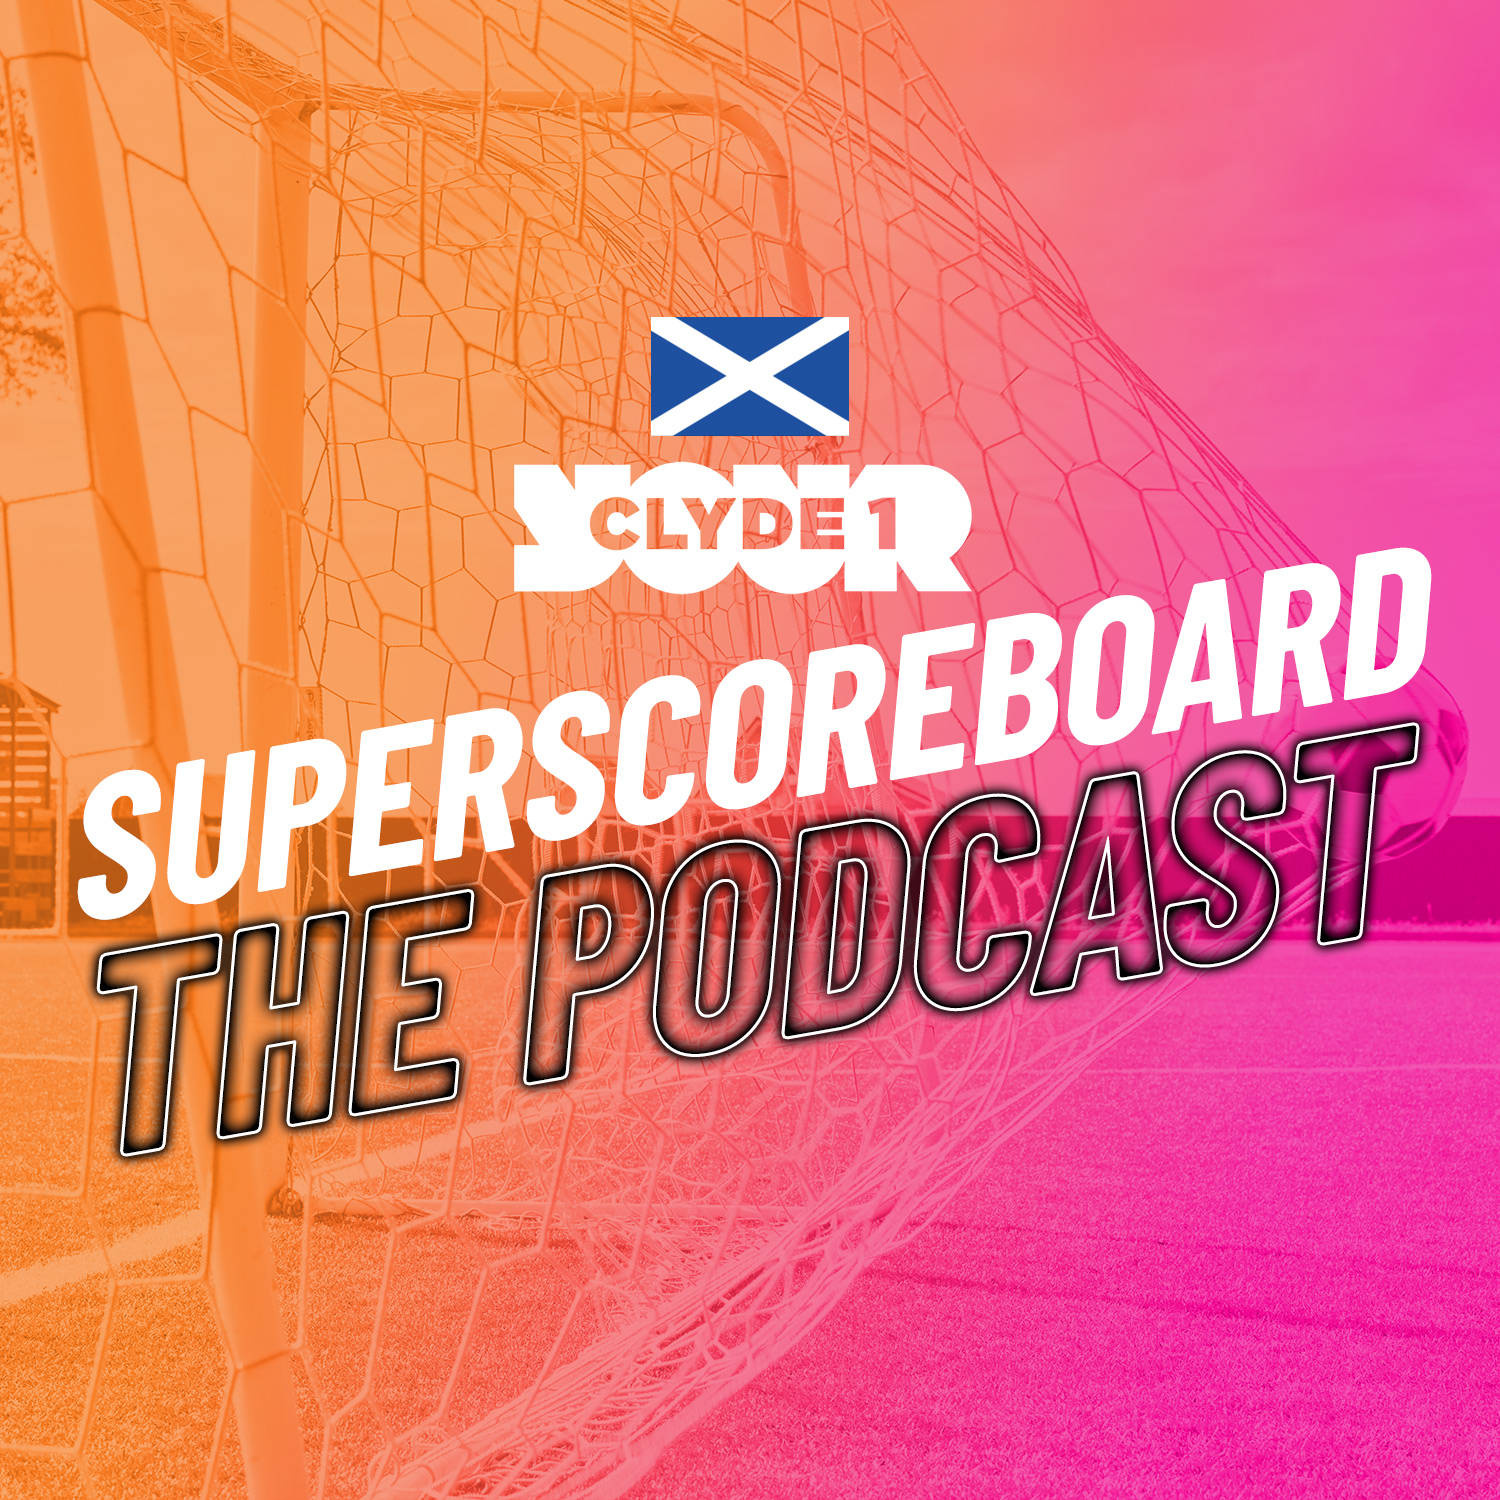 Thursday 30th May Clyde 1 Superscoreboard